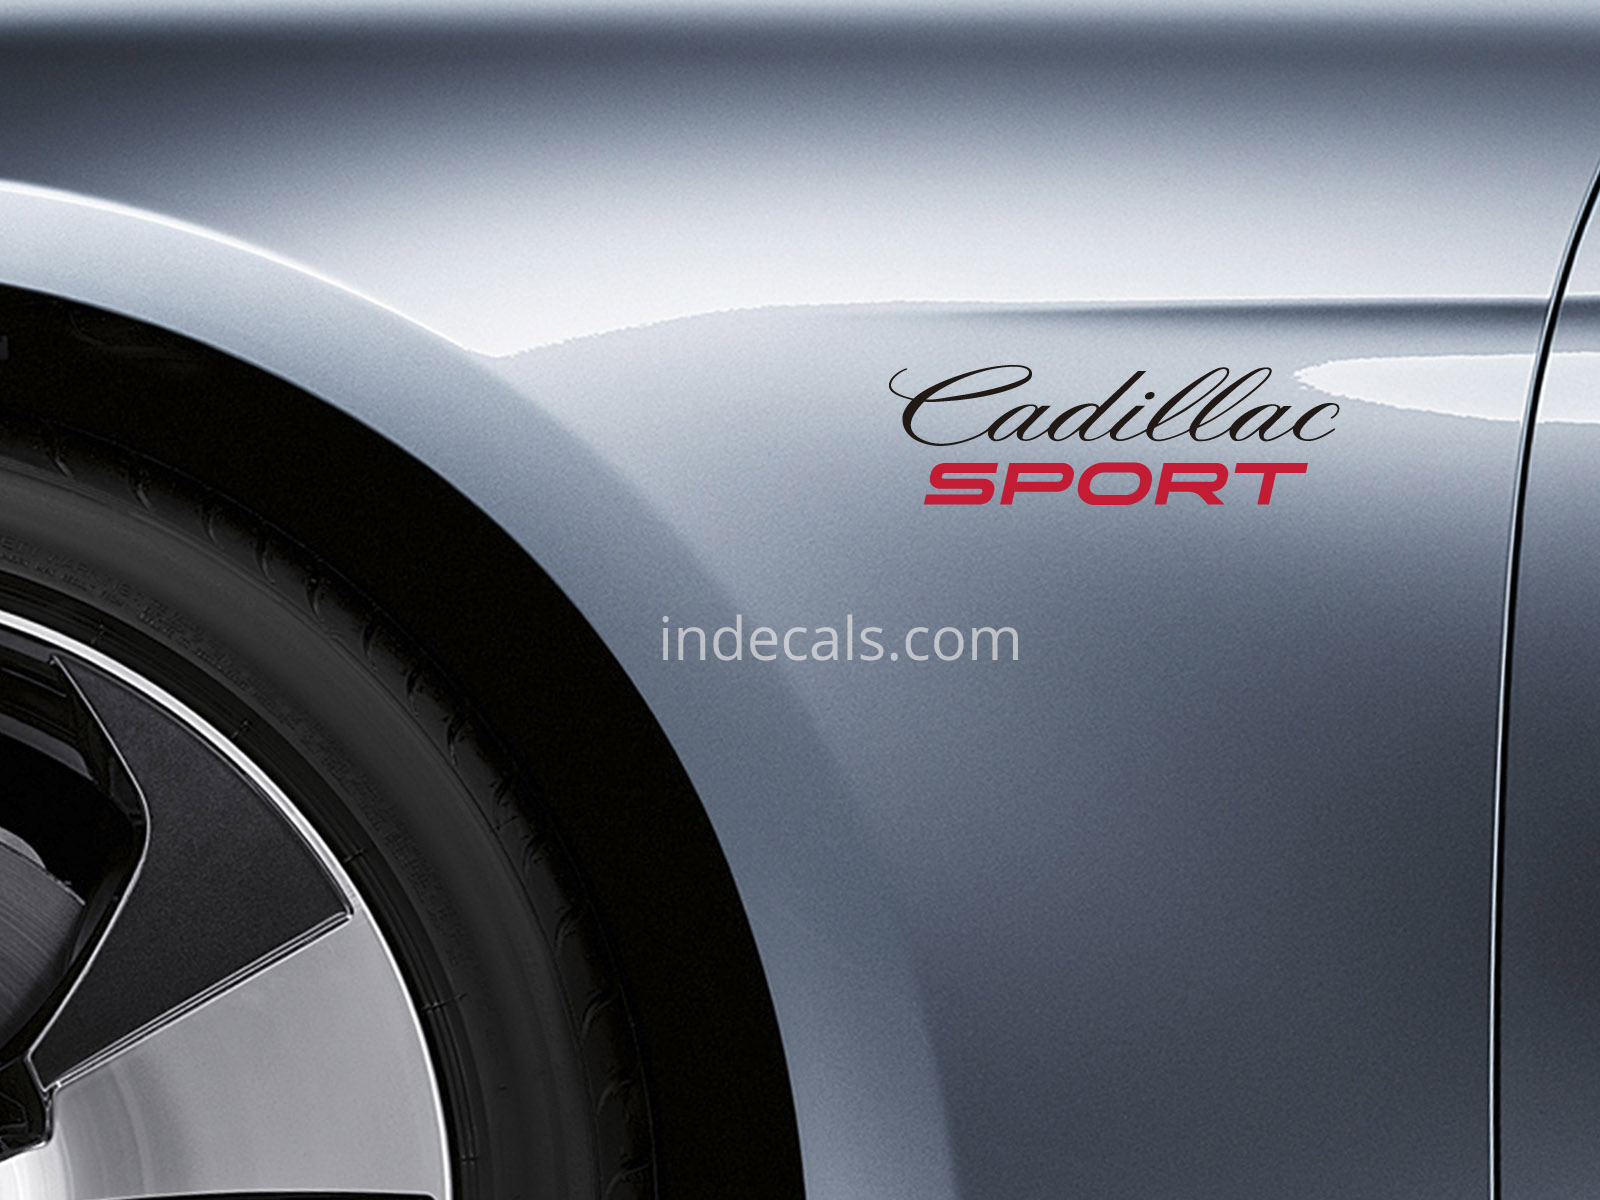 2 x Cadillac Sports stickers for Wings - Black & Red